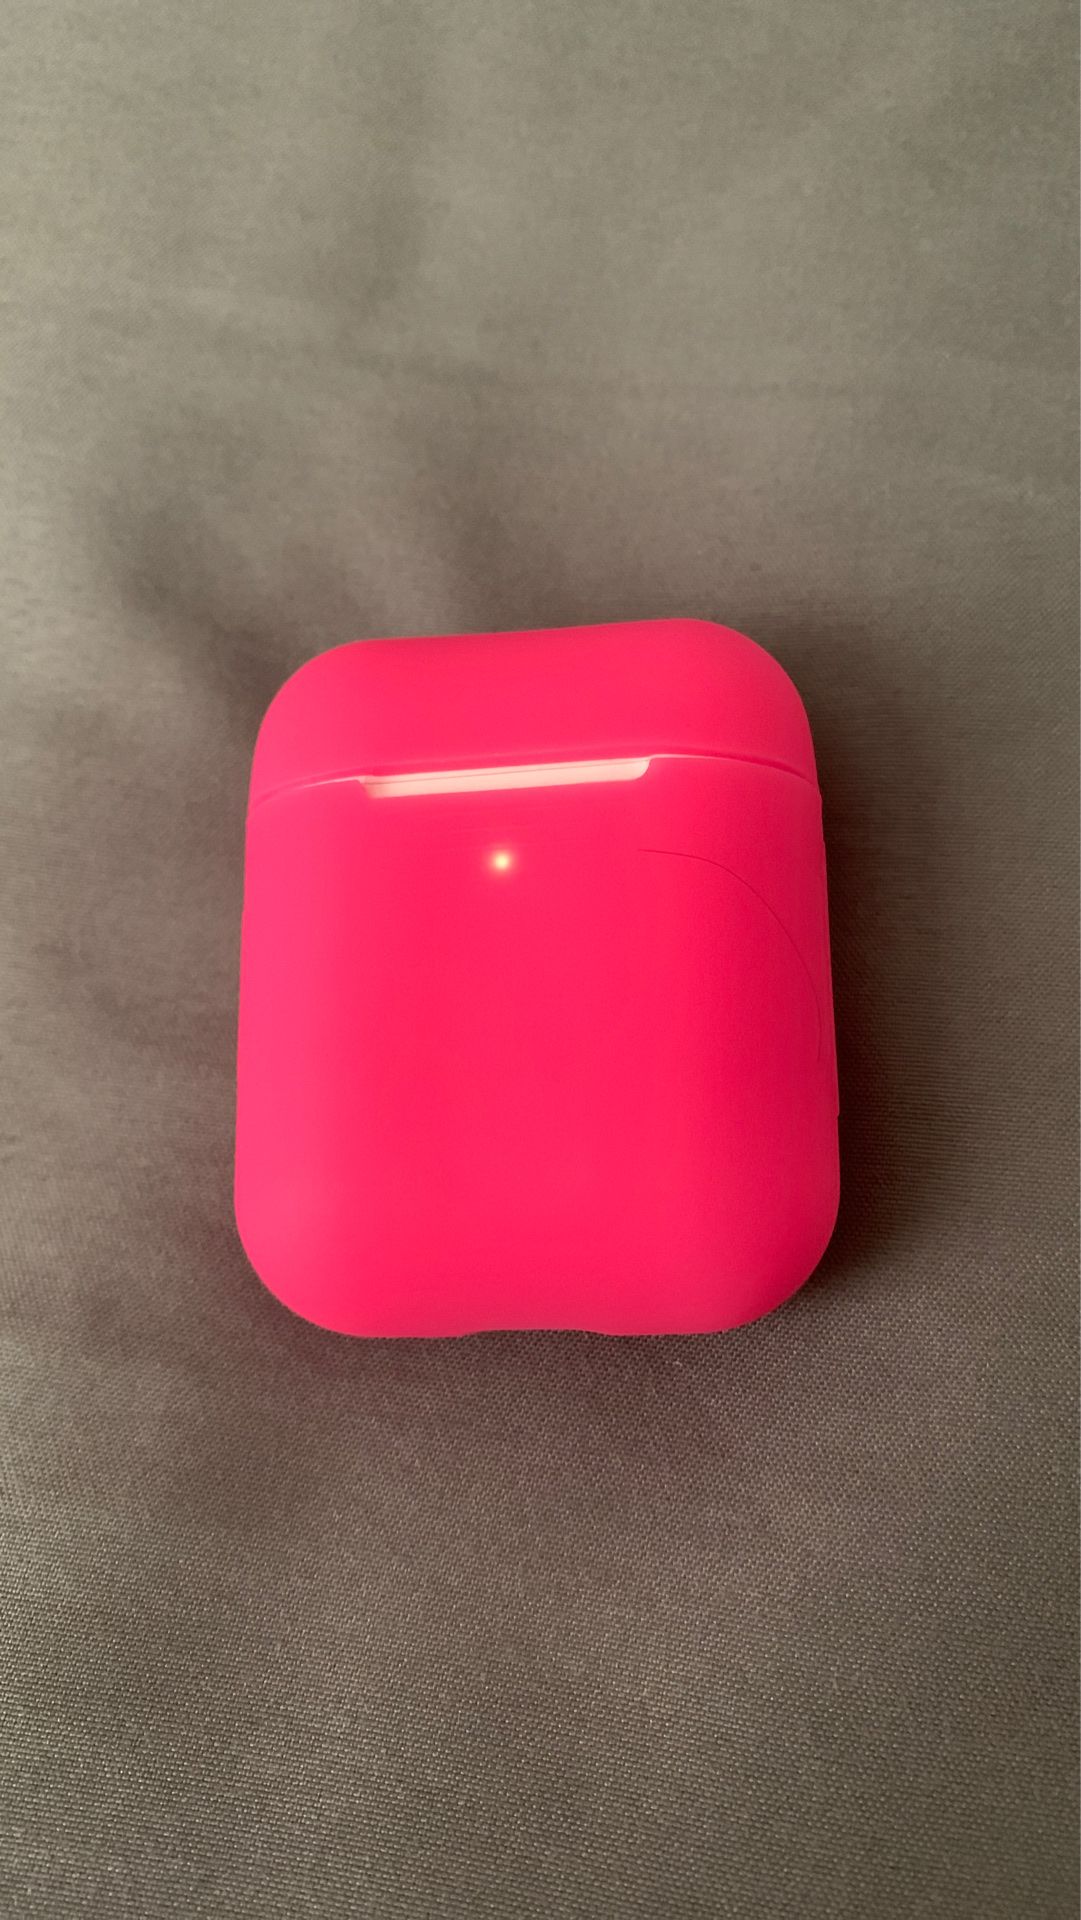 AirPods 2nd Generation w/ wireless charging case